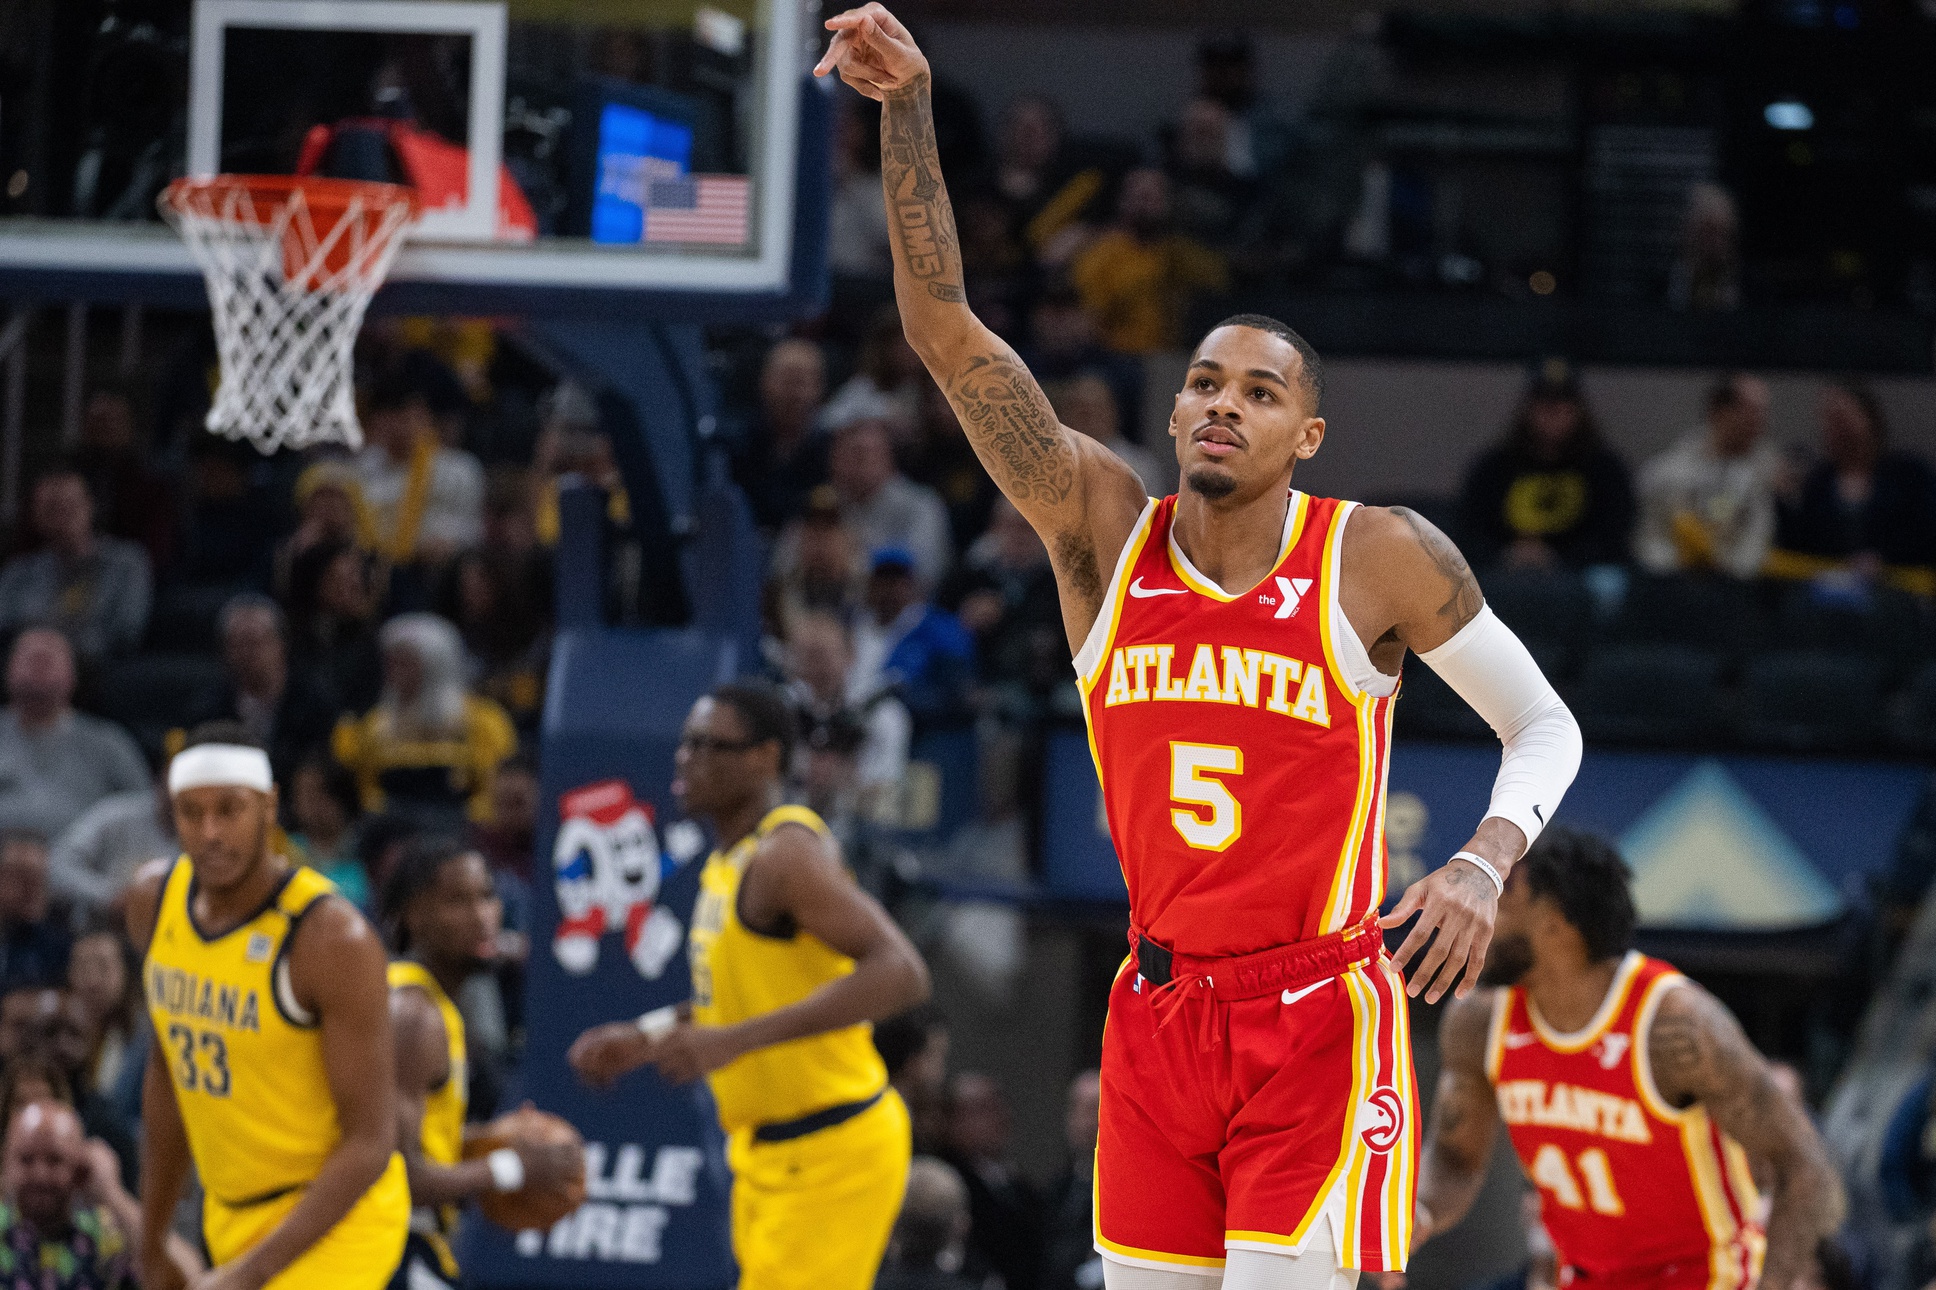 Atlanta Hawks guard Dejounte Murray (5) celebrates a basket in the first quarter against the Indiana Pacers at Gainbridge Fieldhouse.